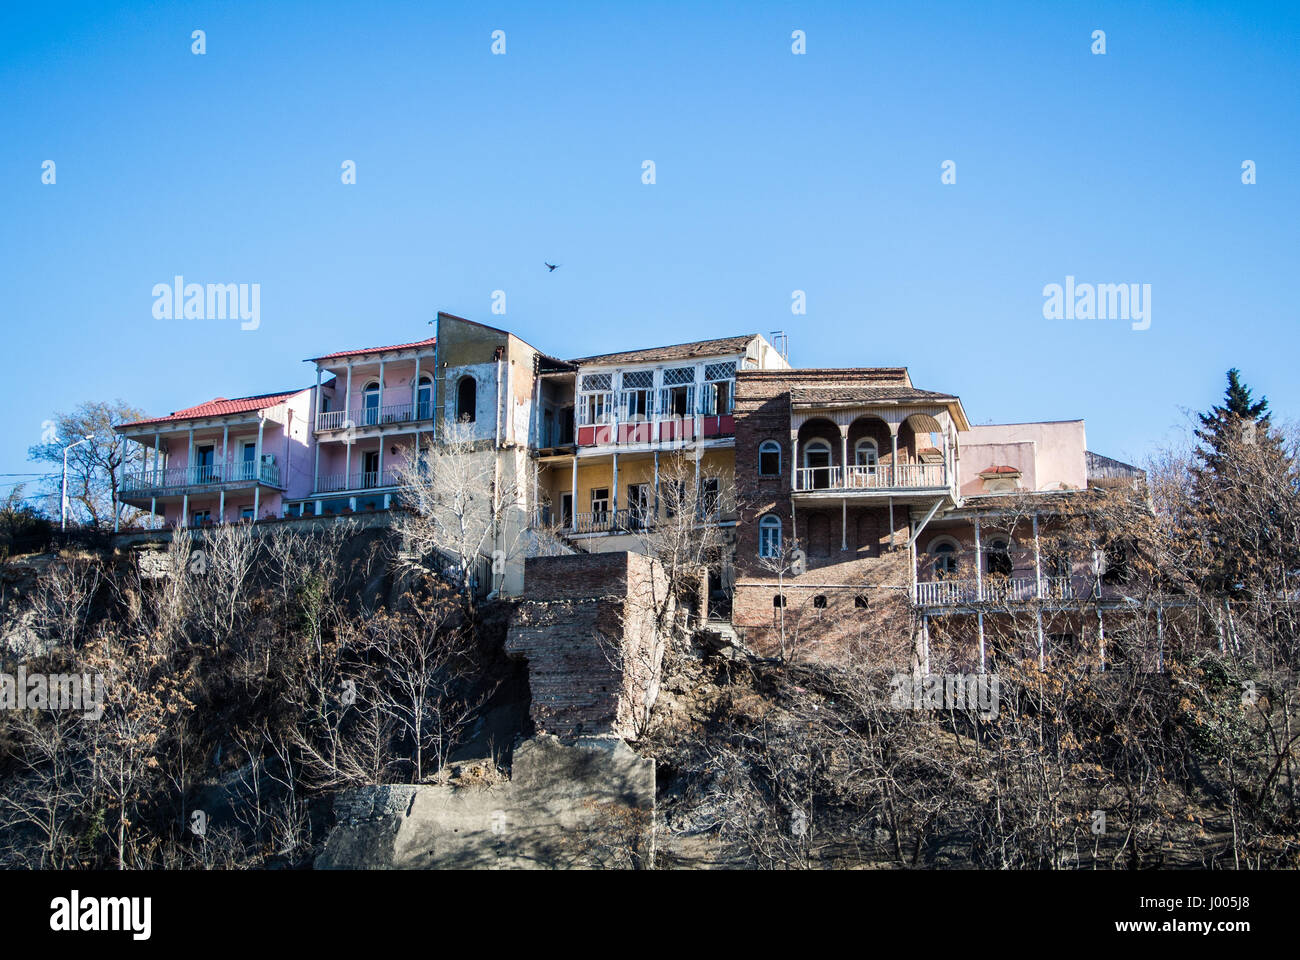 Wooden houses with decorated balconies, a center of Tbilisi old town, Georgia, Caucasus mountains. Stock Photo